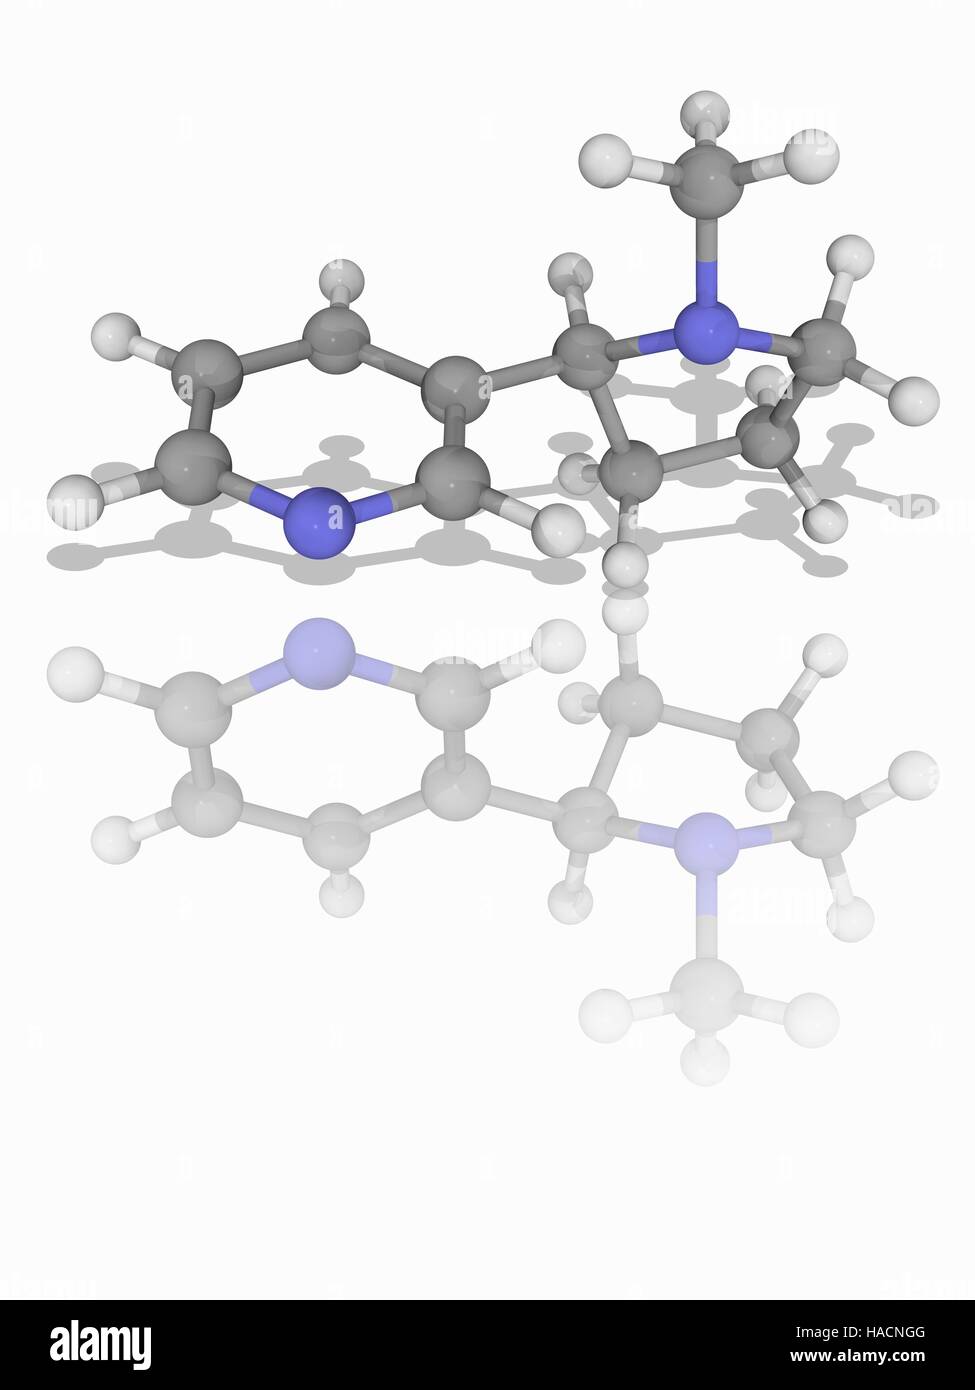 Nicotine. Molecular model of the alkaloid nicotine (C10.H14.N2), a stimulant drug found naturally in plants such as the tobacco plant (Nicotiana tabacum). Atoms are represented as spheres and are colour-coded: carbon (grey), hydrogen (white) and nitrogen (blue). Illustration. Stock Photo